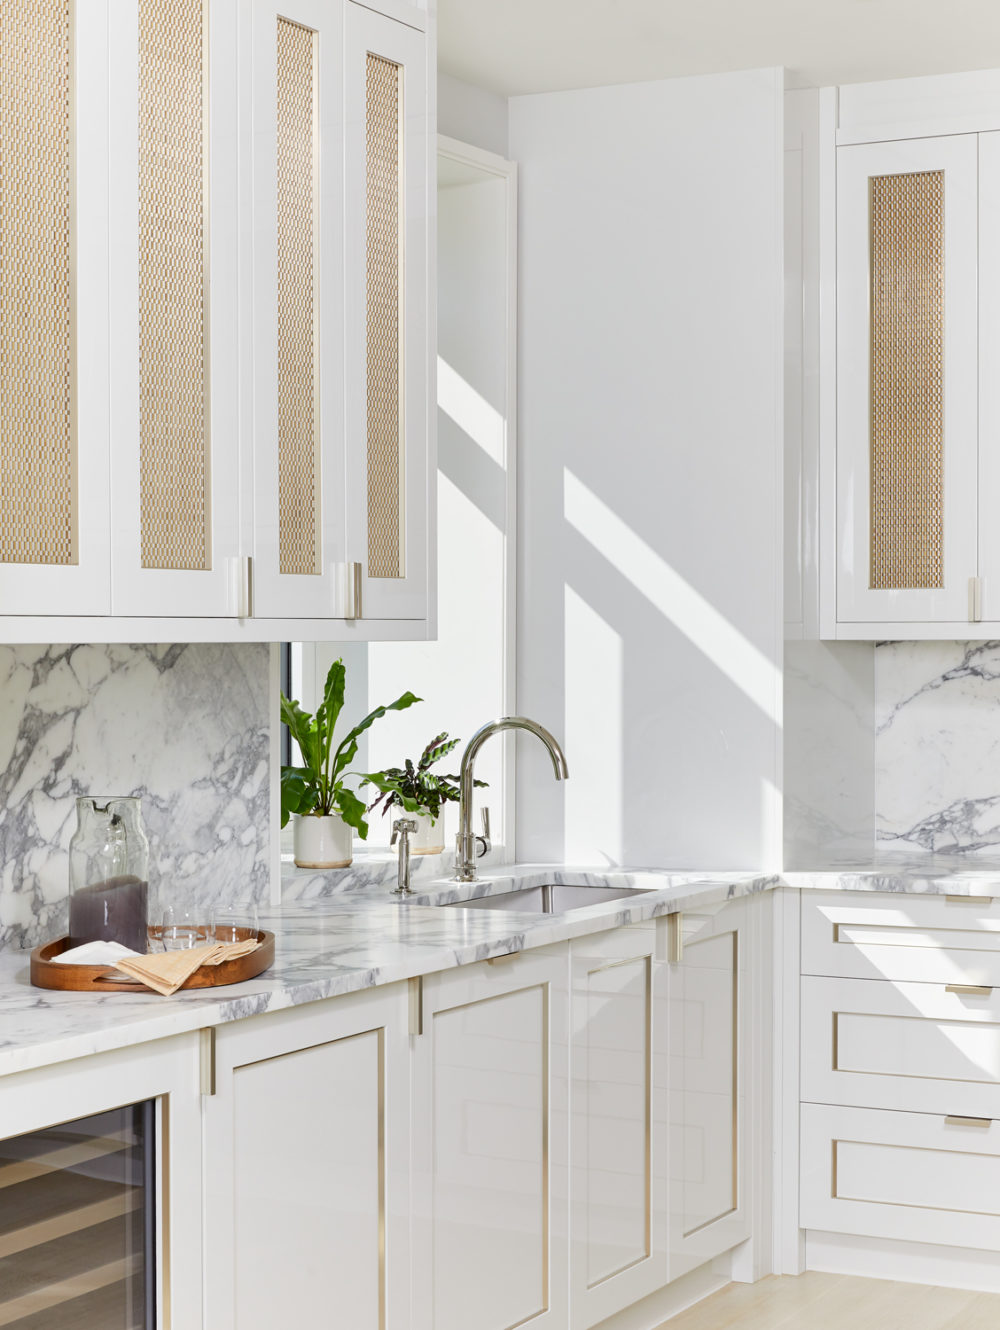 Interior view of 40 East End Ave residence kitchen in NYC. Zoomed in view of marble counters, white walls, and a sink.